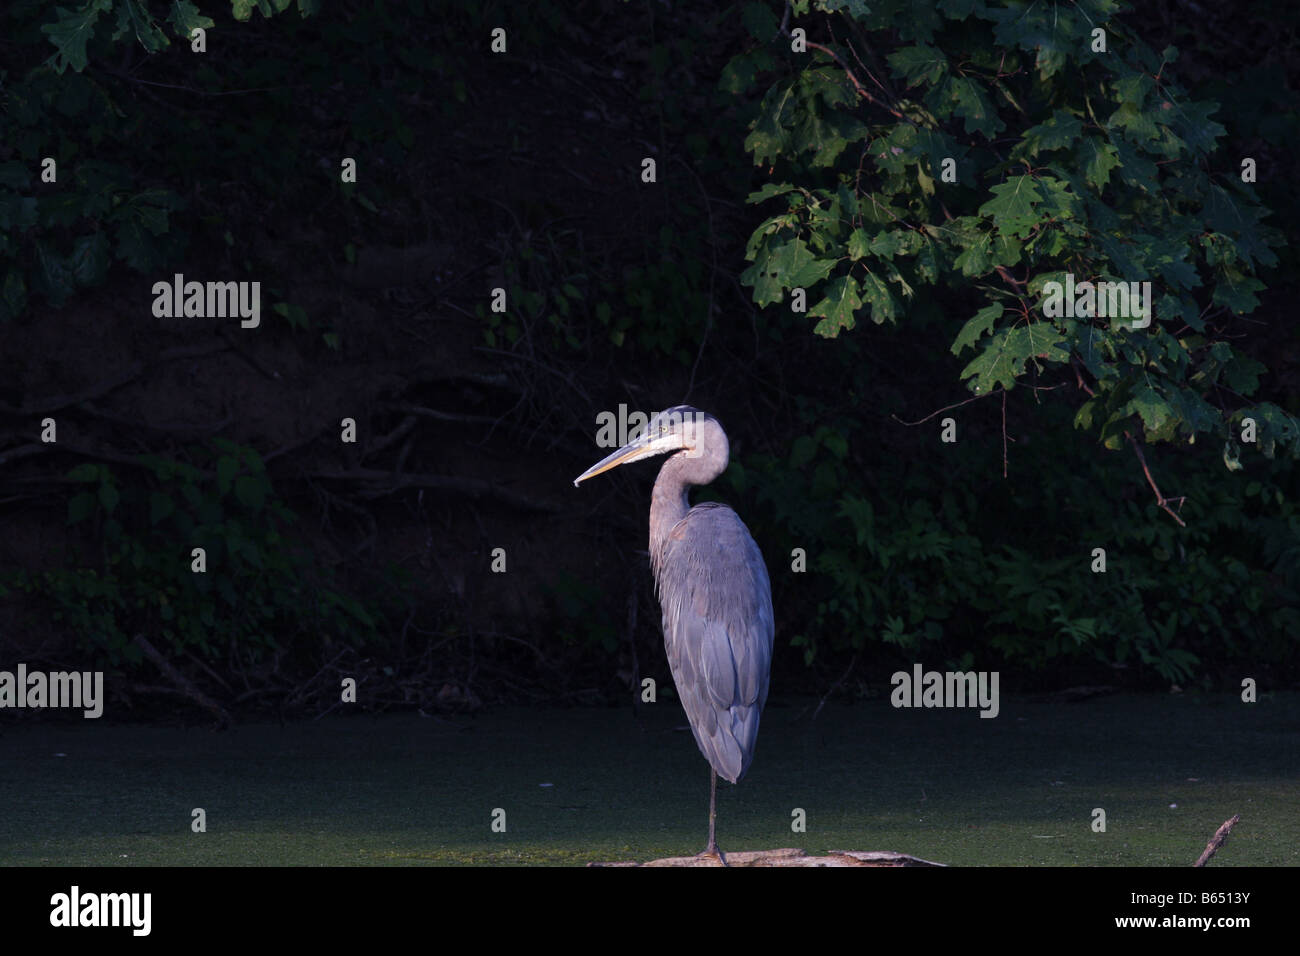 A Great Blue Heron perched on piece of drift wood in a pond. Marshy river scene. Stock Photo